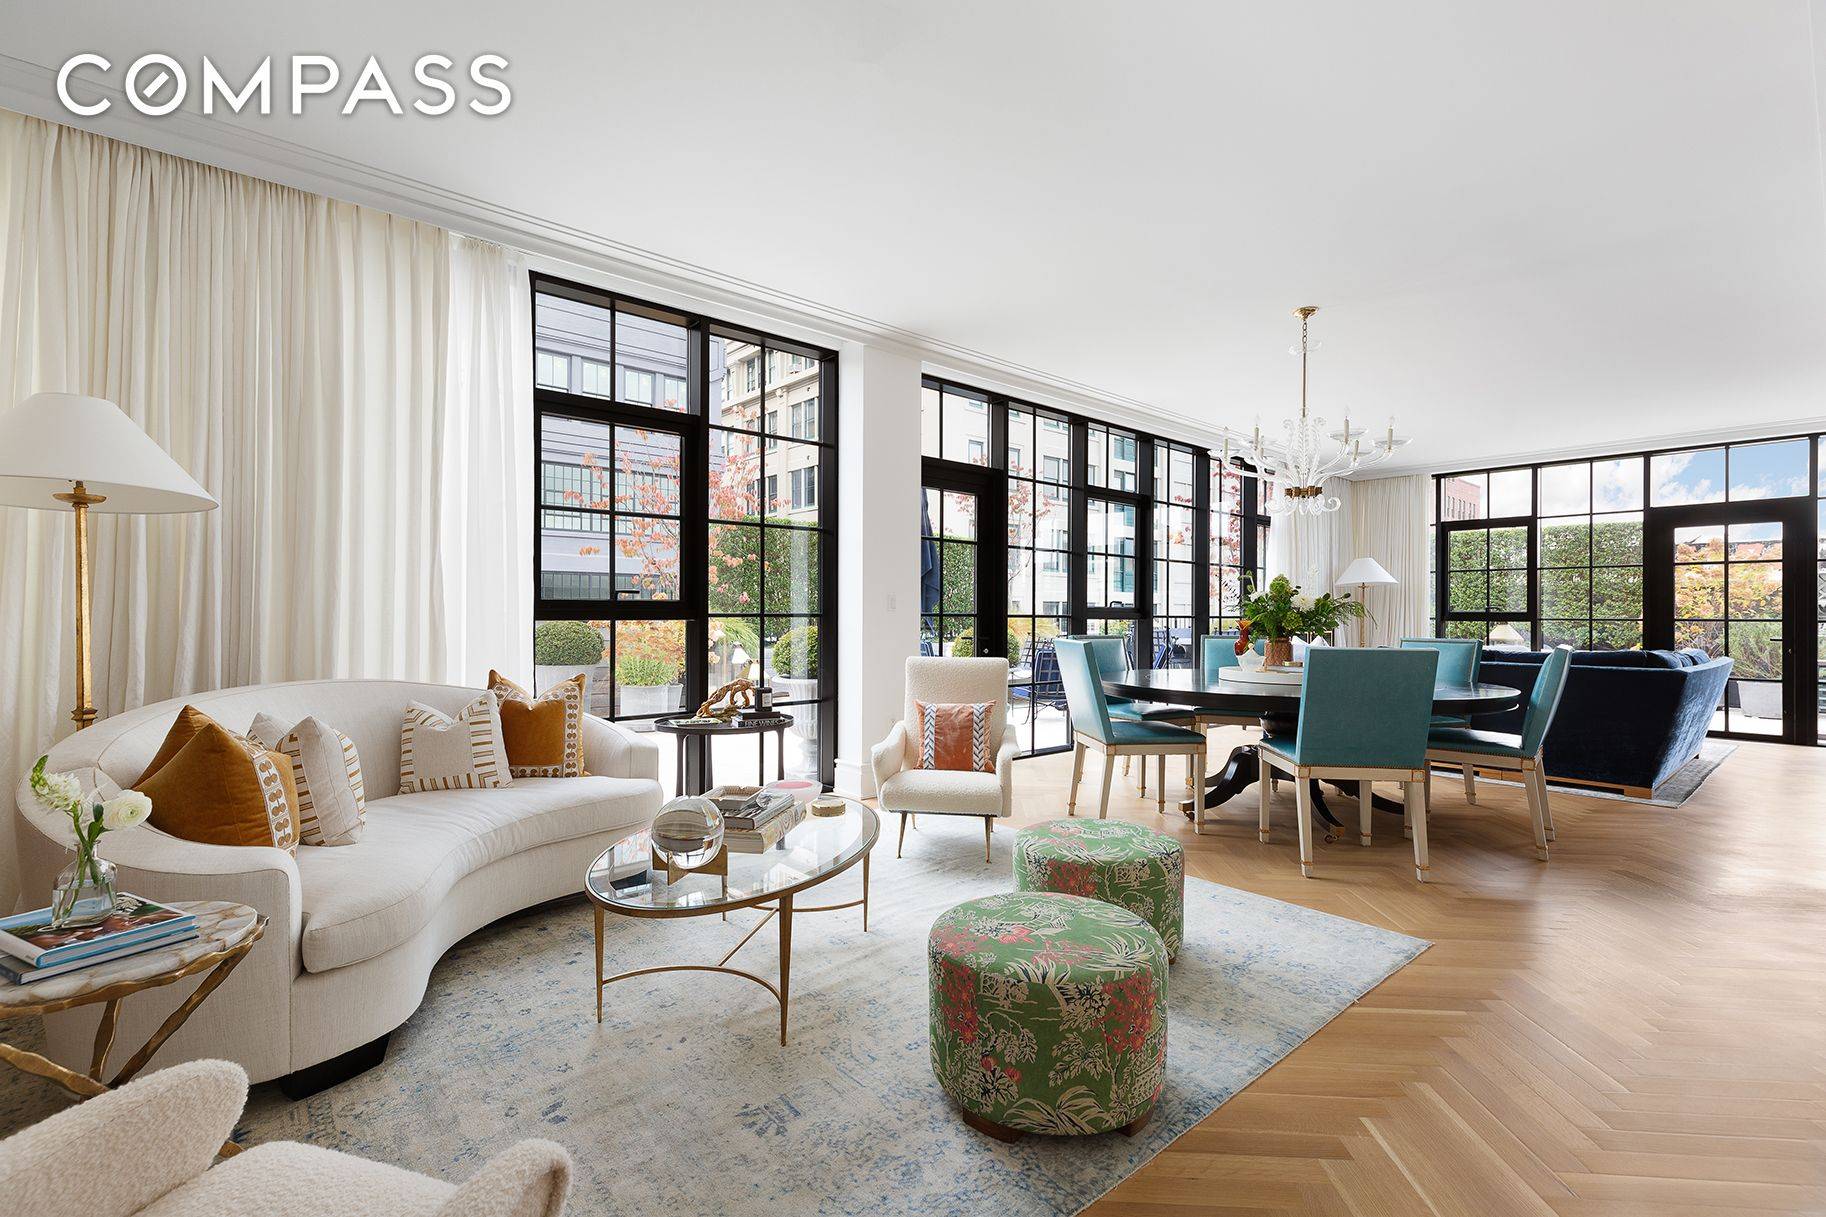 Presenting a one of a kind, impeccably renovated designer Duplex Penthouse in DUMBO.